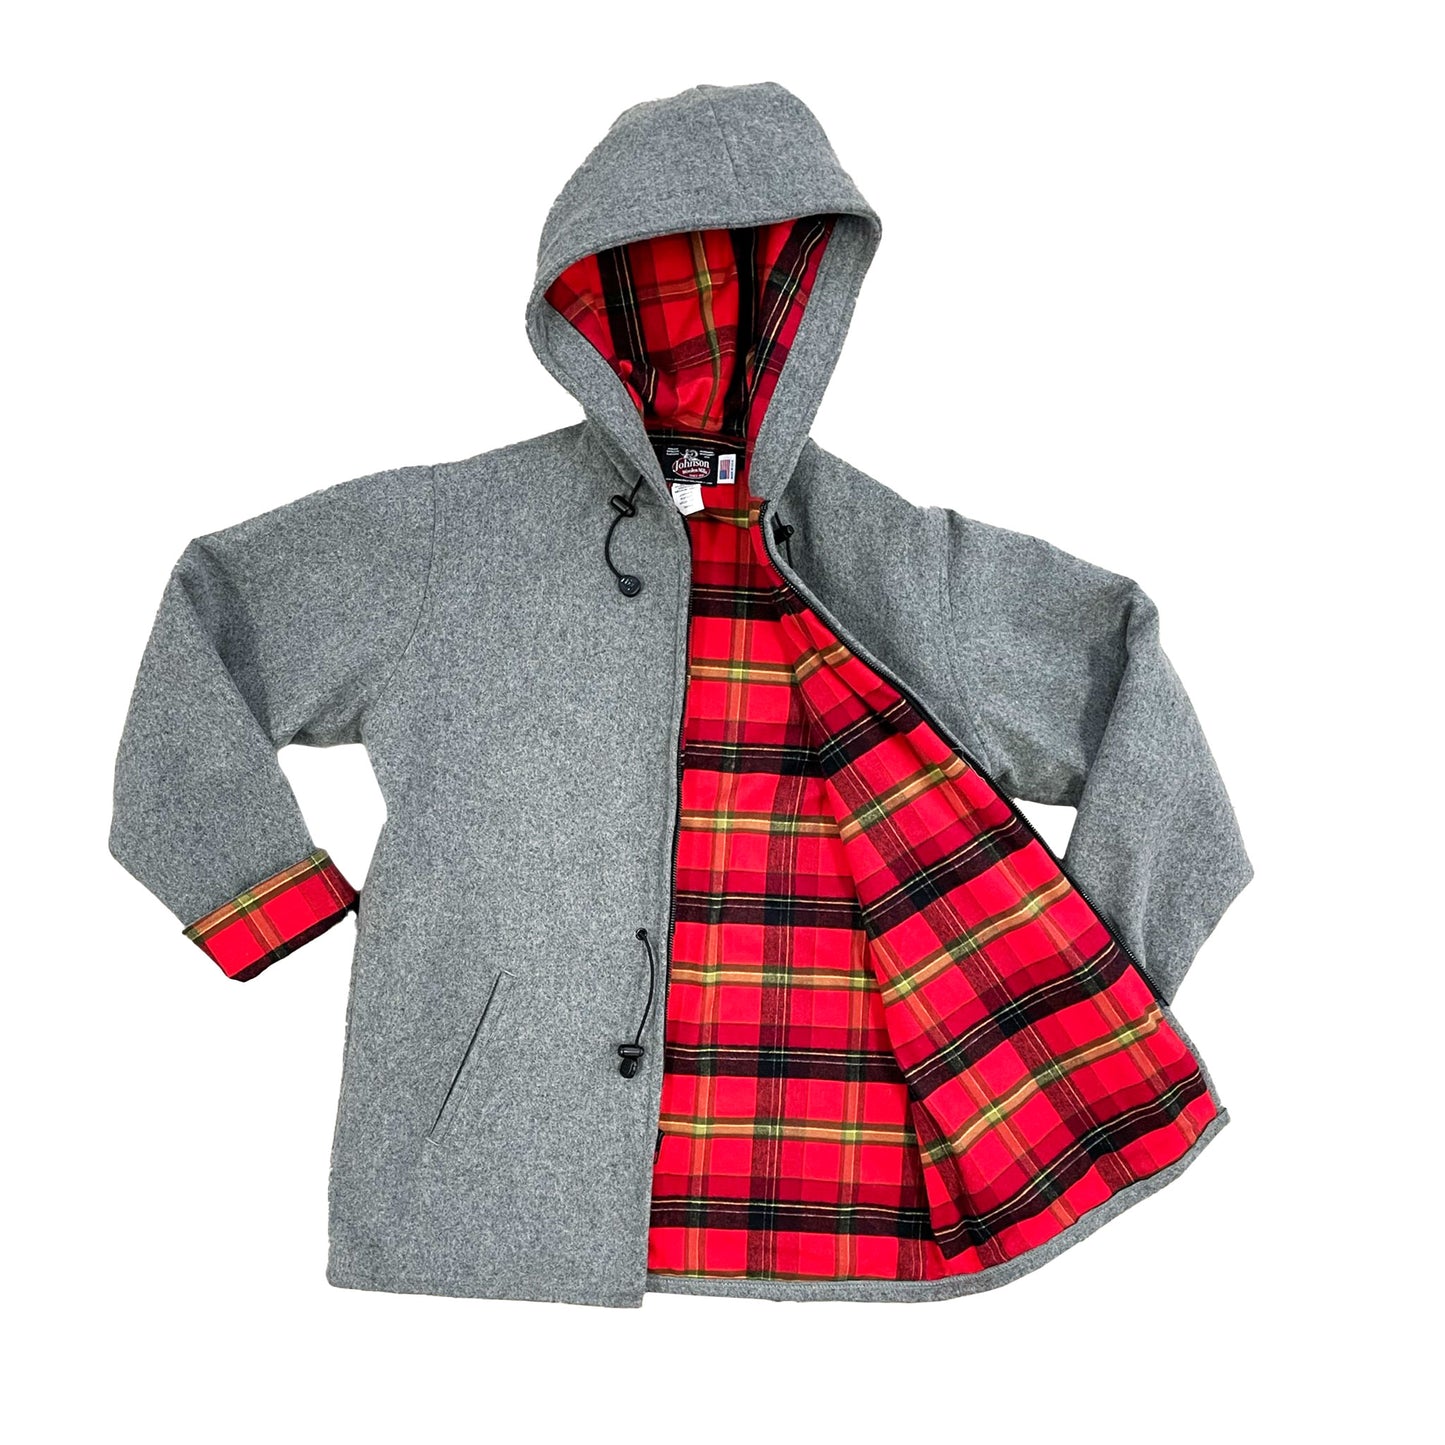 Johnson Woolen Mills Women's gray wool anorak jacket with red, gold and black plaid flannel lining